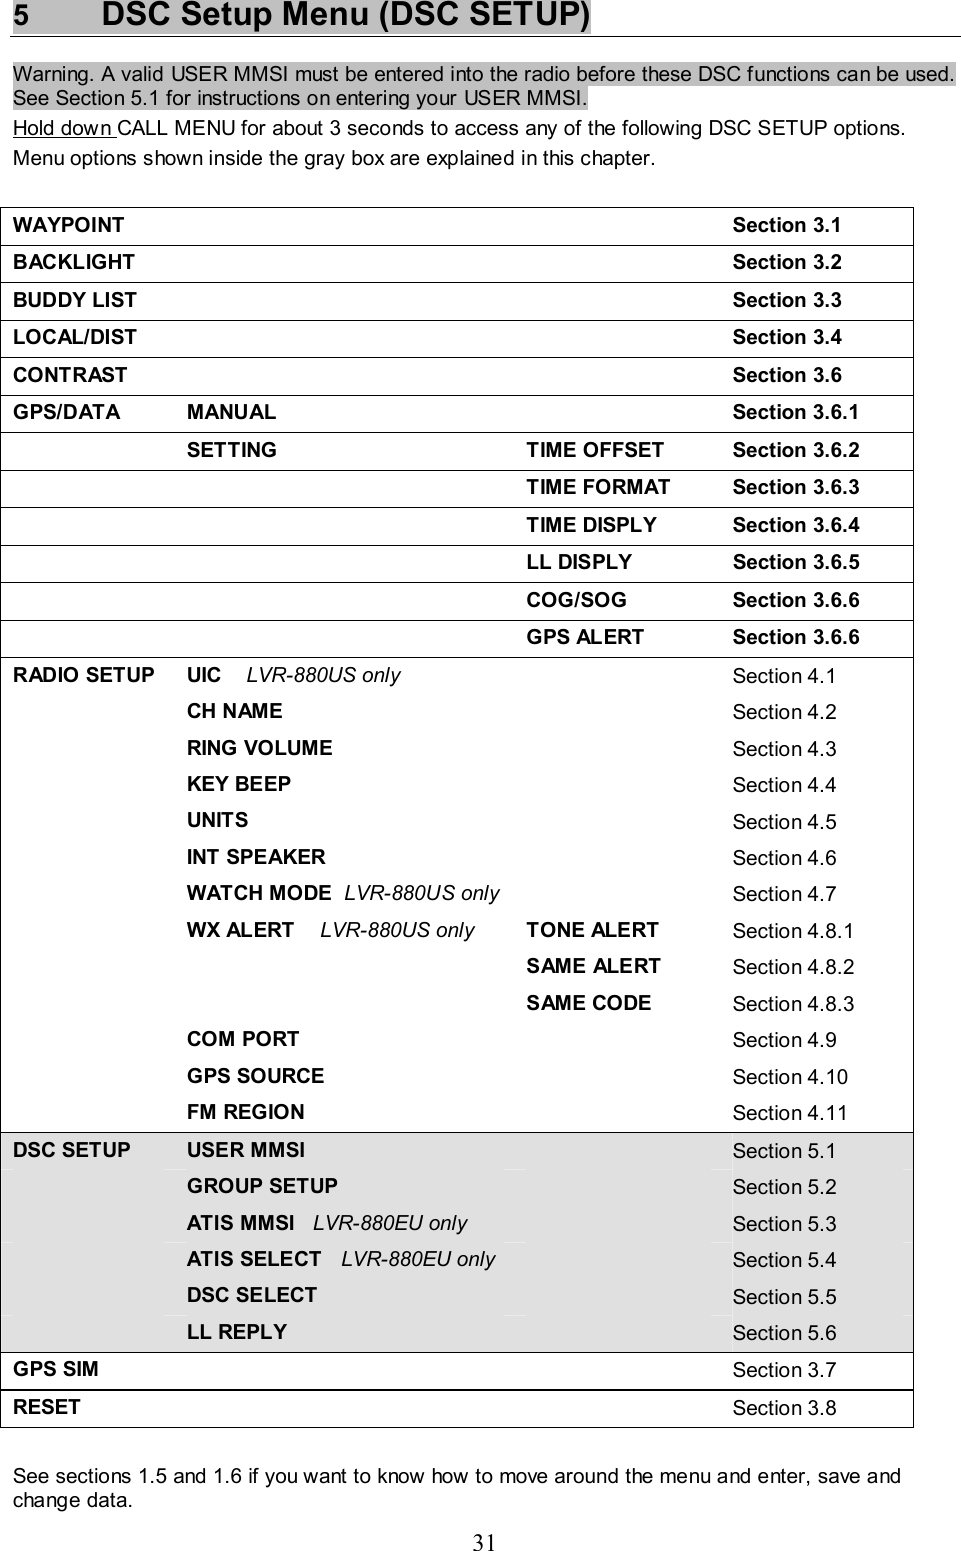 31 5  DSC Setup Menu (DSC SETUP) Warning. A valid USER MMSI must be entered into the radio before these DSC functions can be used. See Section 5.1 for instructions on entering your USER MMSI.  Hold down CALL MENU for about 3 seconds to access any of the following DSC SETUP options.  Menu options shown inside the gray box are explained in this chapter.  WAYPOINT   Section 3.1 BACKLIGHT    Section 3.2 BUDDY LIST   Section 3.3 LOCAL/DIST    Section 3.4 CONTRAST   Section 3.6 GPS/DATA MANUAL  Section 3.6.1  SETTING TIME OFFSET Section 3.6.2   TIME FORMAT Section 3.6.3   TIME DISPLY Section 3.6.4    LL DISPLY  Section 3.6.5   COG/SOG Section 3.6.6    GPS ALERT  Section 3.6.6 RADIO SETUP  UIC    LVR-880US only   Section 4.1  CH NAME    Section 4.2  RING VOLUME    Section 4.3  KEY BEEP    Section 4.4  UNITS    Section 4.5  INT SPEAKER   Section 4.6   WATCH MODE  LVR-880US only   Section 4.7   WX ALERT    LVR-880US only TONE ALERT  Section 4.8.1    SAME ALERT Section 4.8.2    SAME CODE Section 4.8.3  COM PORT    Section 4.9  GPS SOURCE    Section 4.10  FM REGION    Section 4.11 DSC SETUP  USER MMSI   Section 5.1  GROUP SETUP   Section 5.2  ATIS MMSI   LVR-880EU only    Section 5.3  ATIS SELECT   LVR-880EU only    Section 5.4  DSC SELECT  Section 5.5  LL REPLY   Section 5.6 GPS SIM    Section 3.7 RESET    Section 3.8  See sections 1.5 and 1.6 if you want to know how to move around the menu and enter, save and change data.  